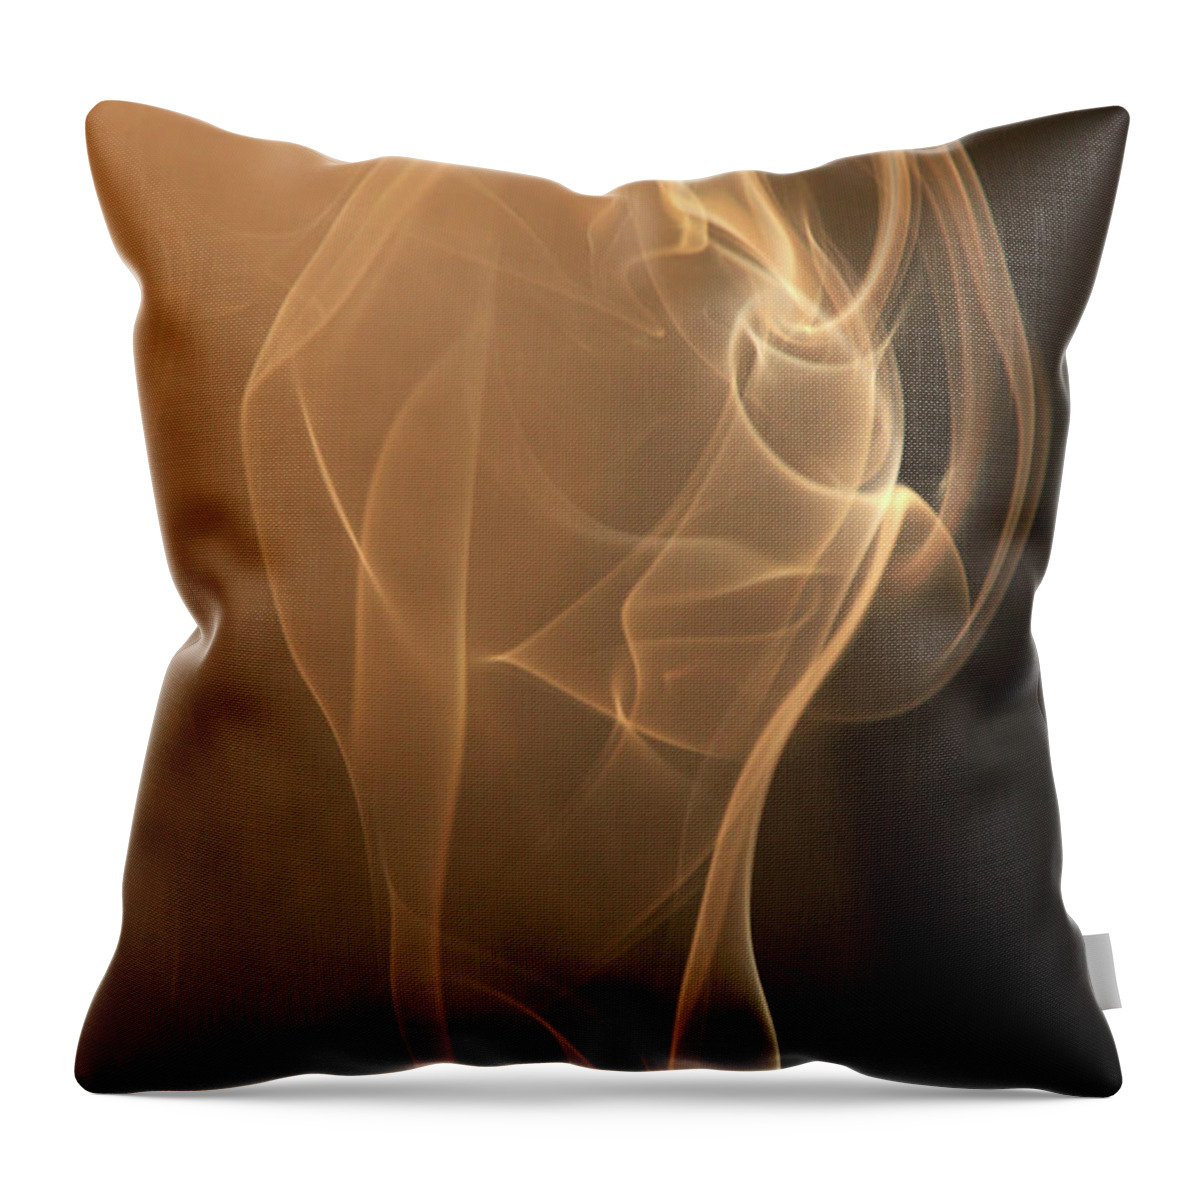 Animali Throw Pillow featuring the photograph Sembianze Di Donna by Simone Lucchesi